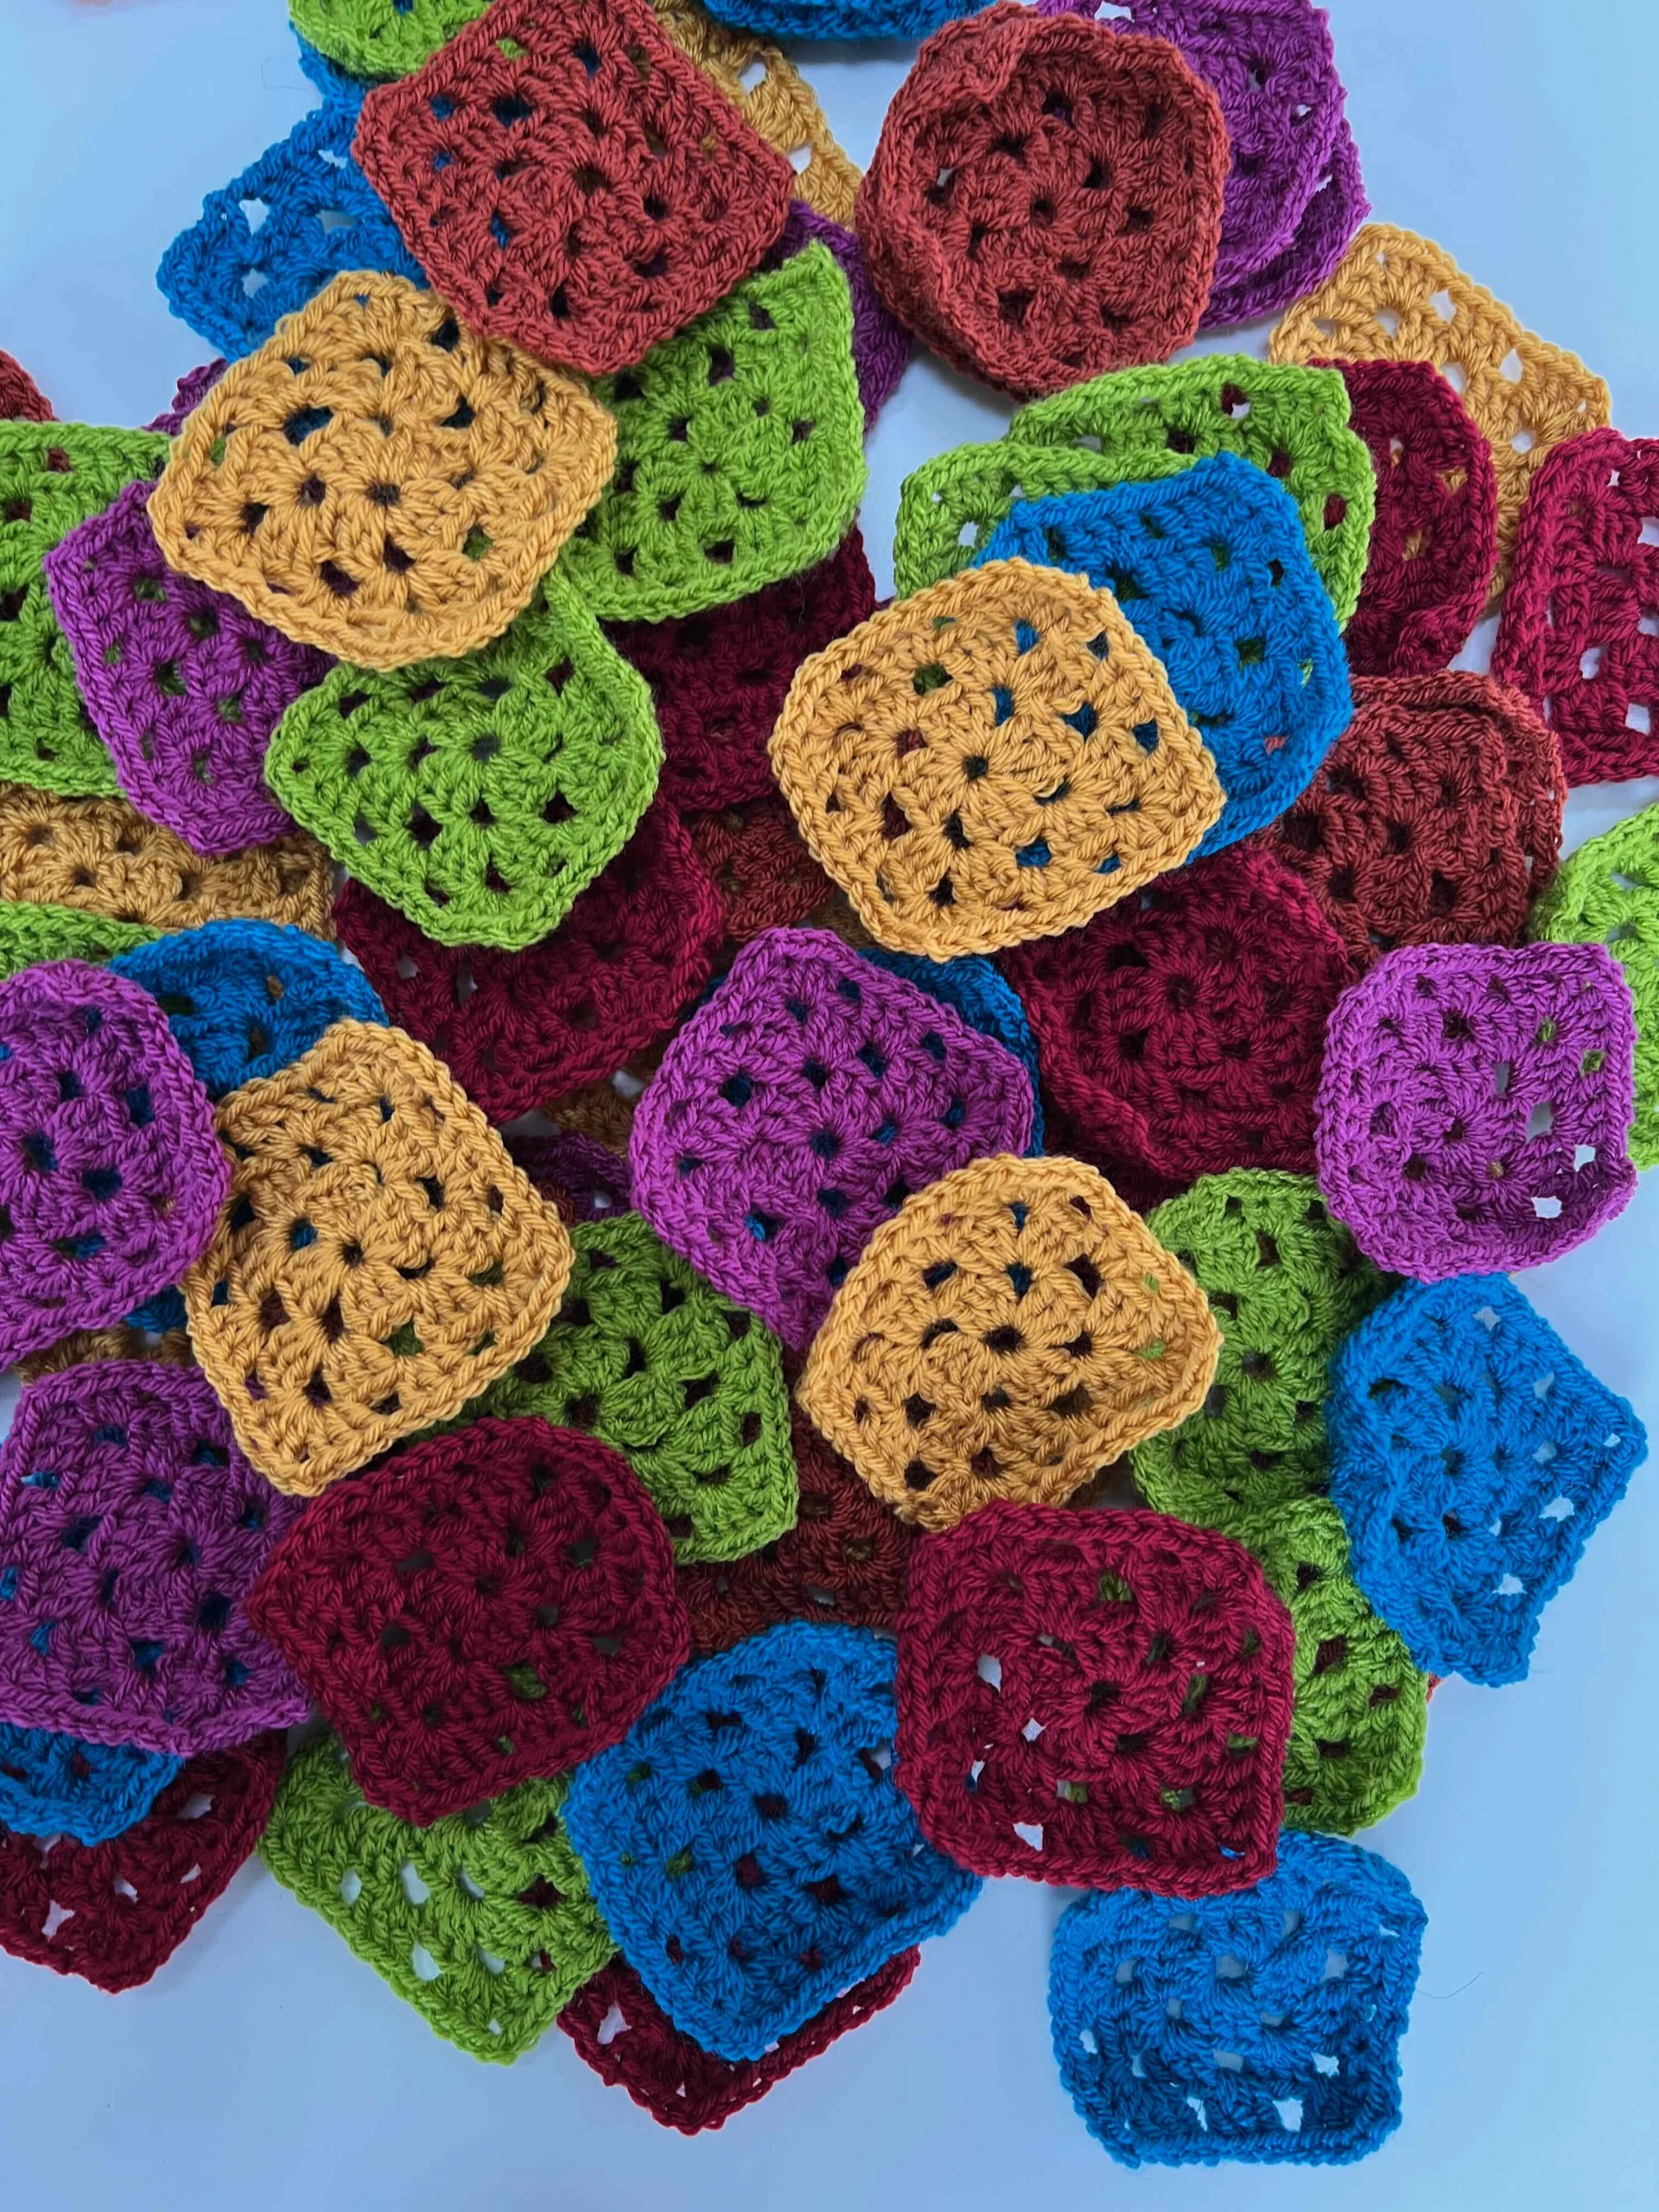 How many granny squares does it take to make a sweater